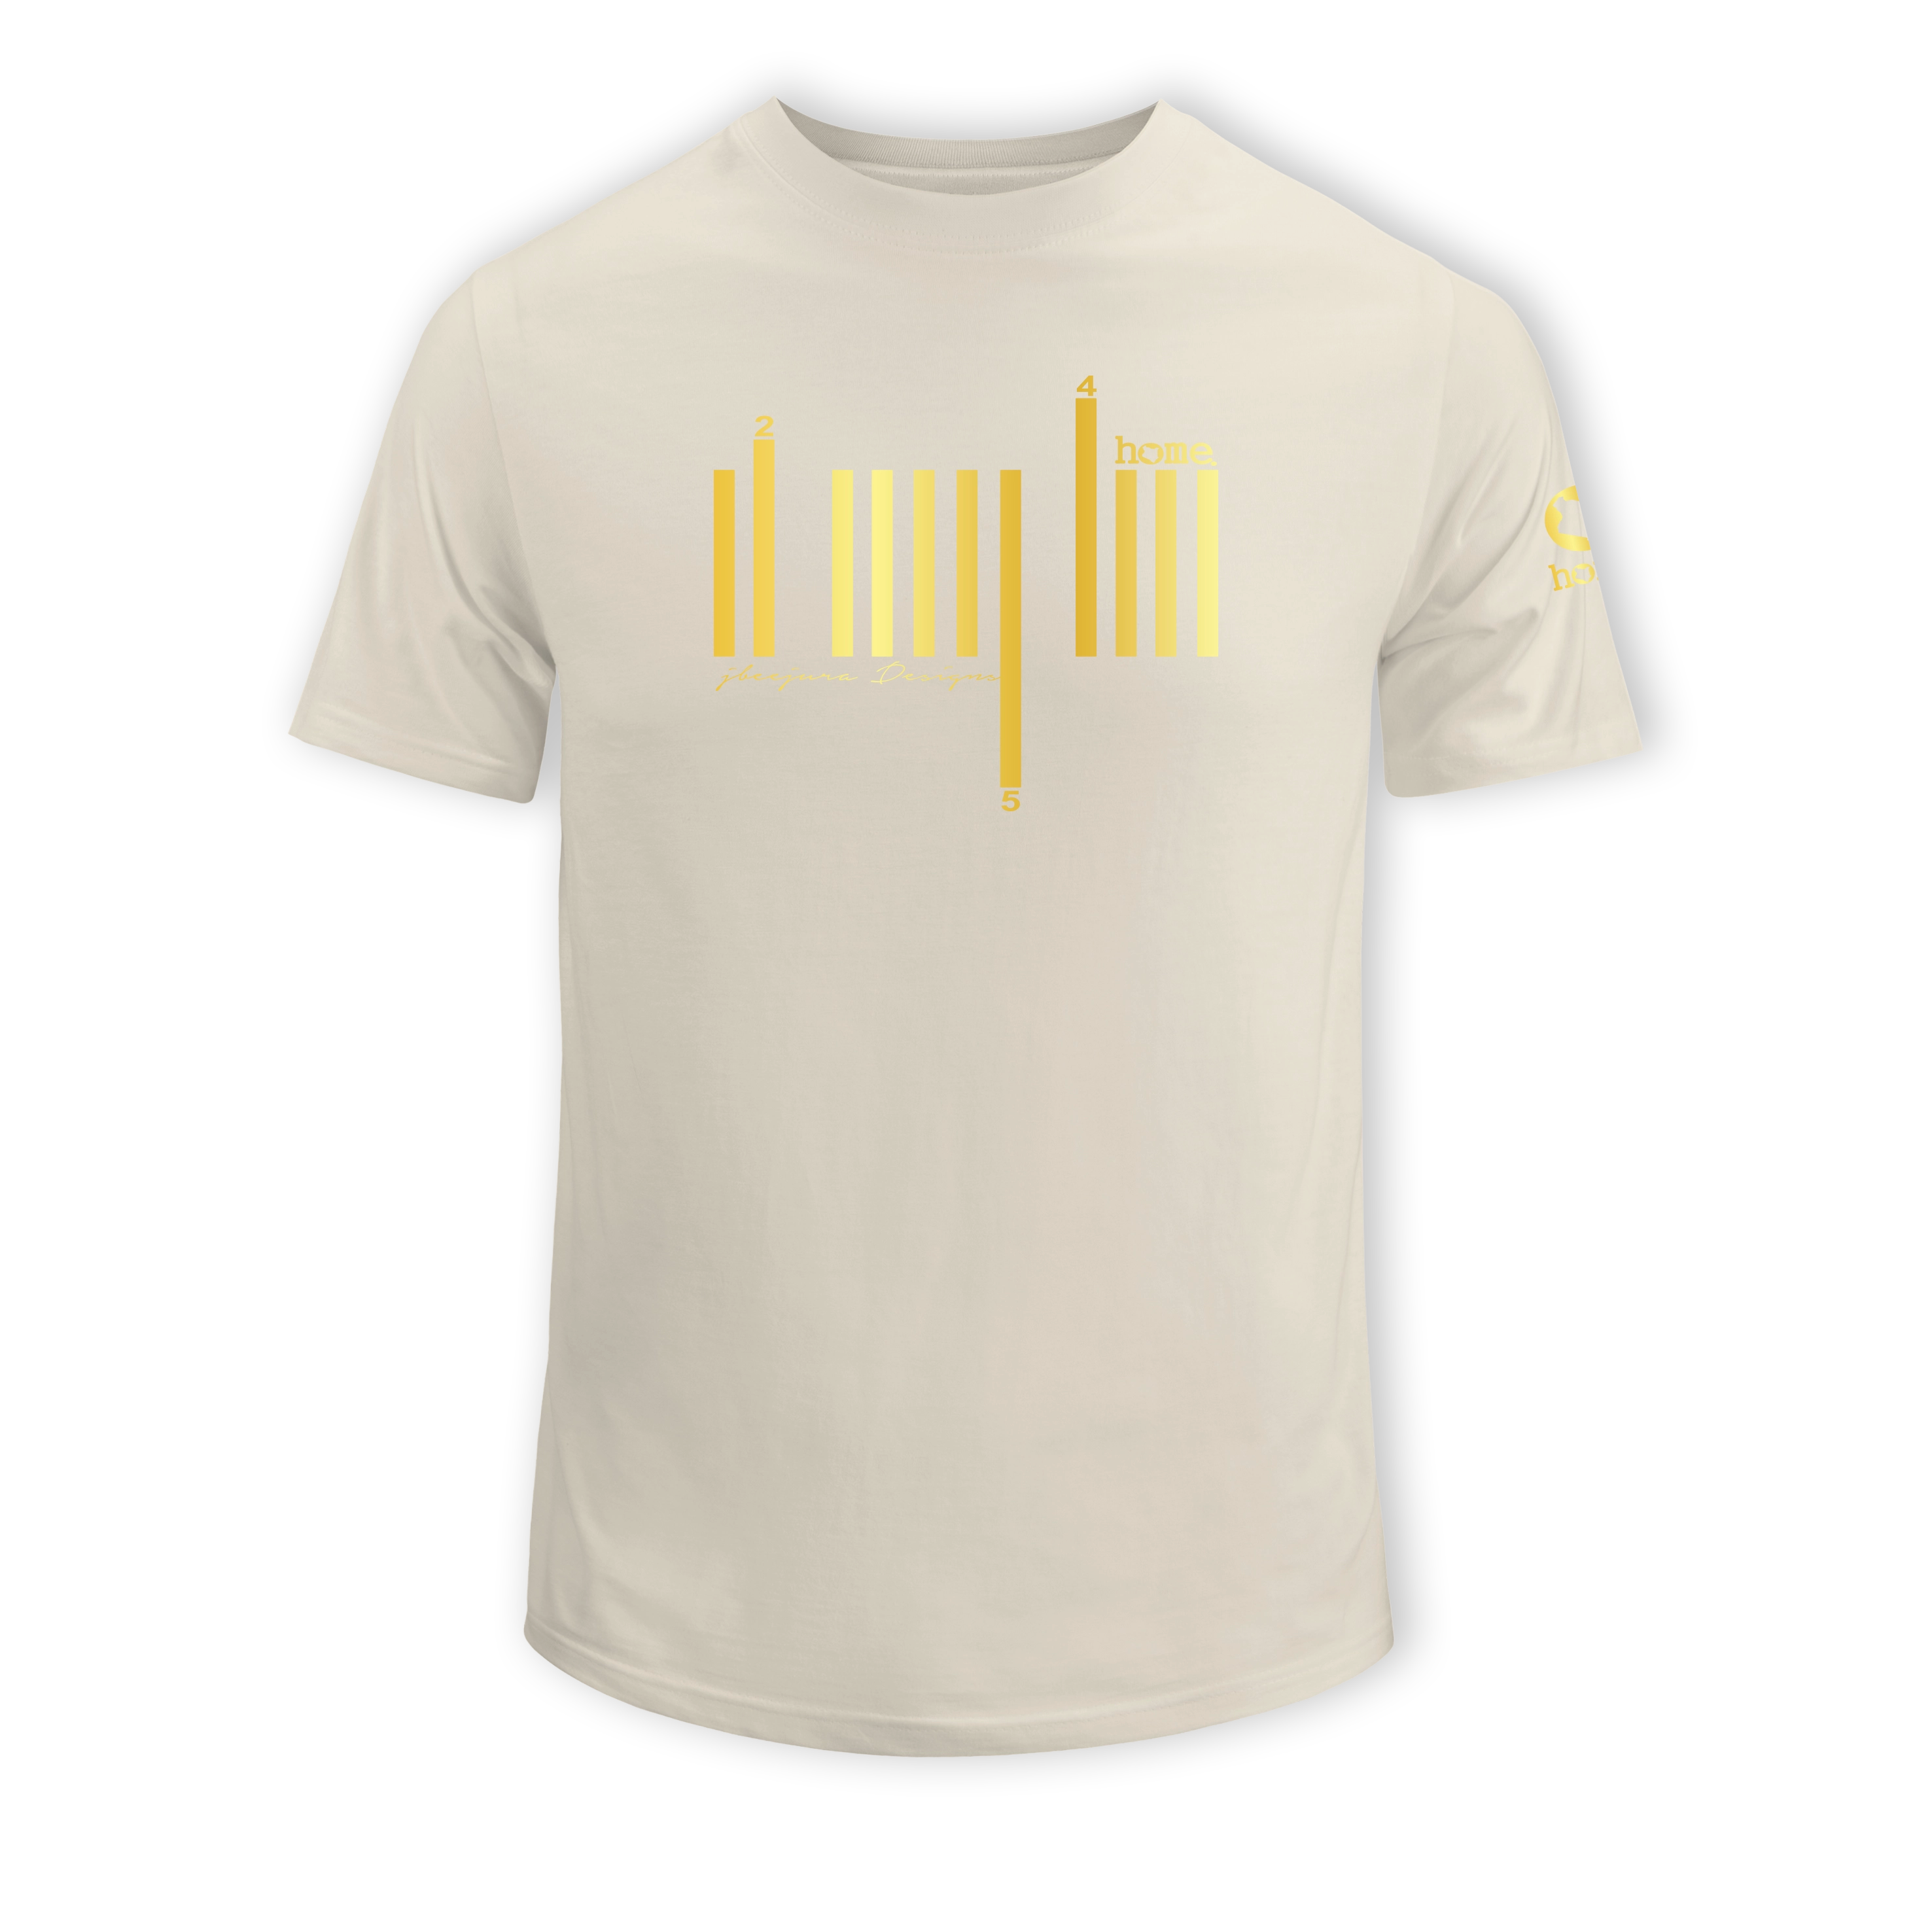 home_254 SHORT-SLEEVED NUDE T-SHIRT WITH A GOLD BARS PRINT – COTTON PLUS FABRIC